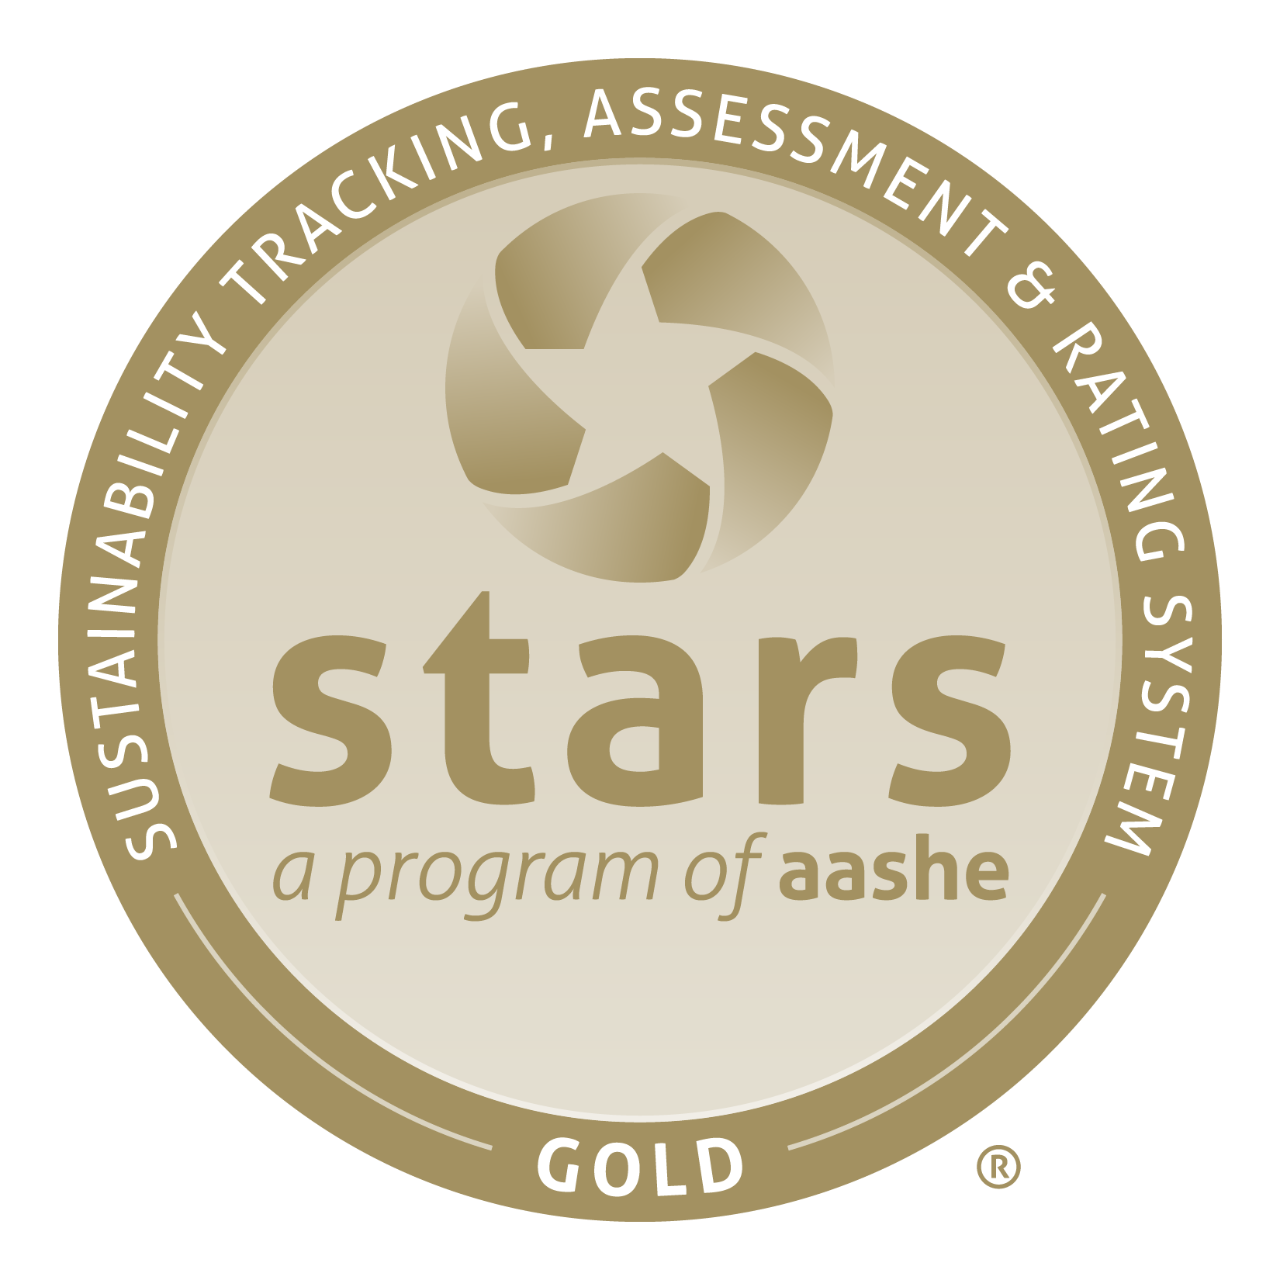 A circular gold seal reads "sustainability tracking, assessment & rating system - gold" with a logo saying "stars a program of aashe" in the center.